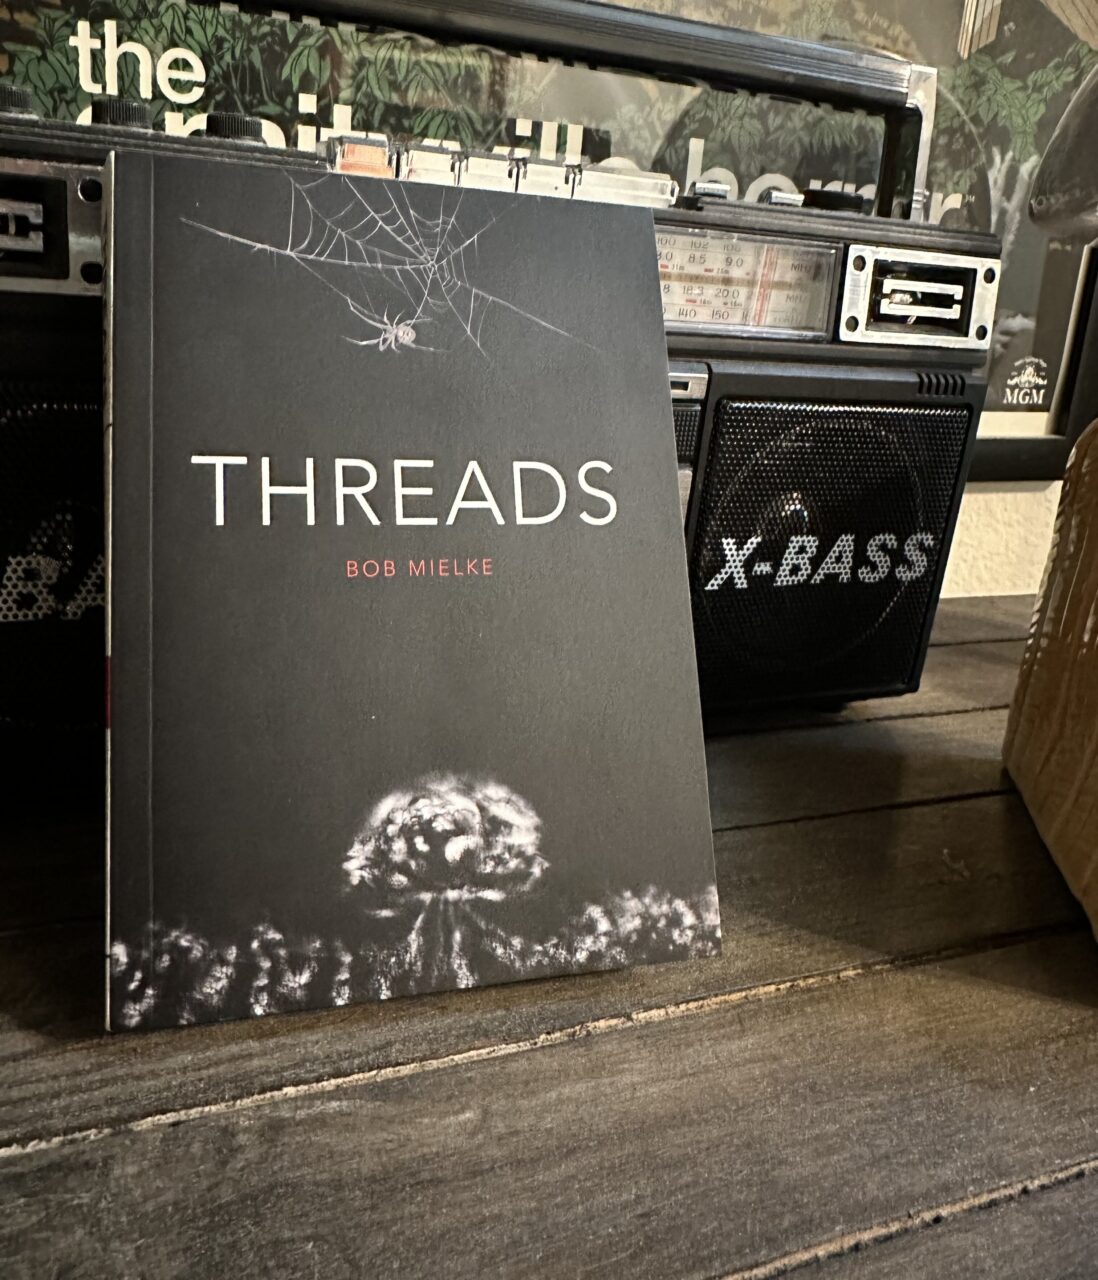 IMG 2569 scaled - 'Threads' is a Must-Read From New Press DieDieBooks